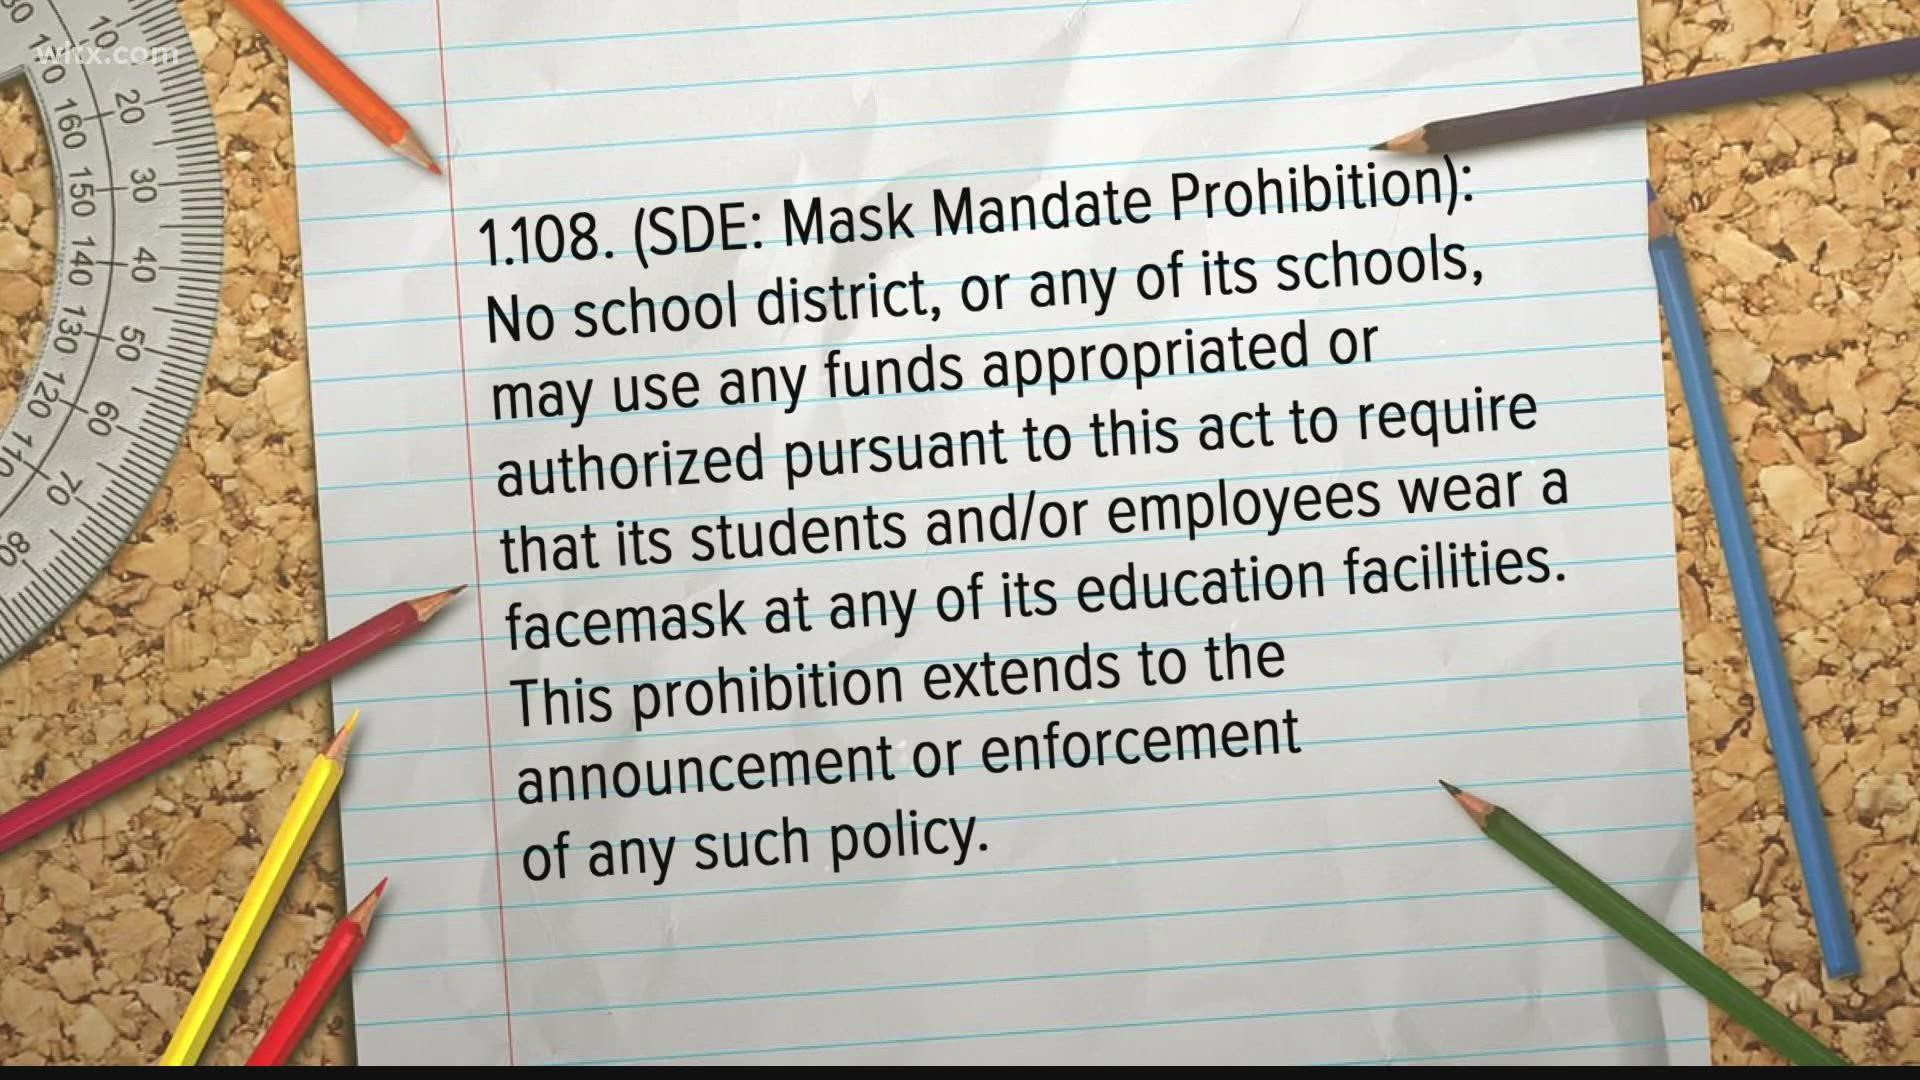 More questions are being raised about the budget proviso preventing SC schools from using state funds to mandate masks. Some think they may have found a loophole.